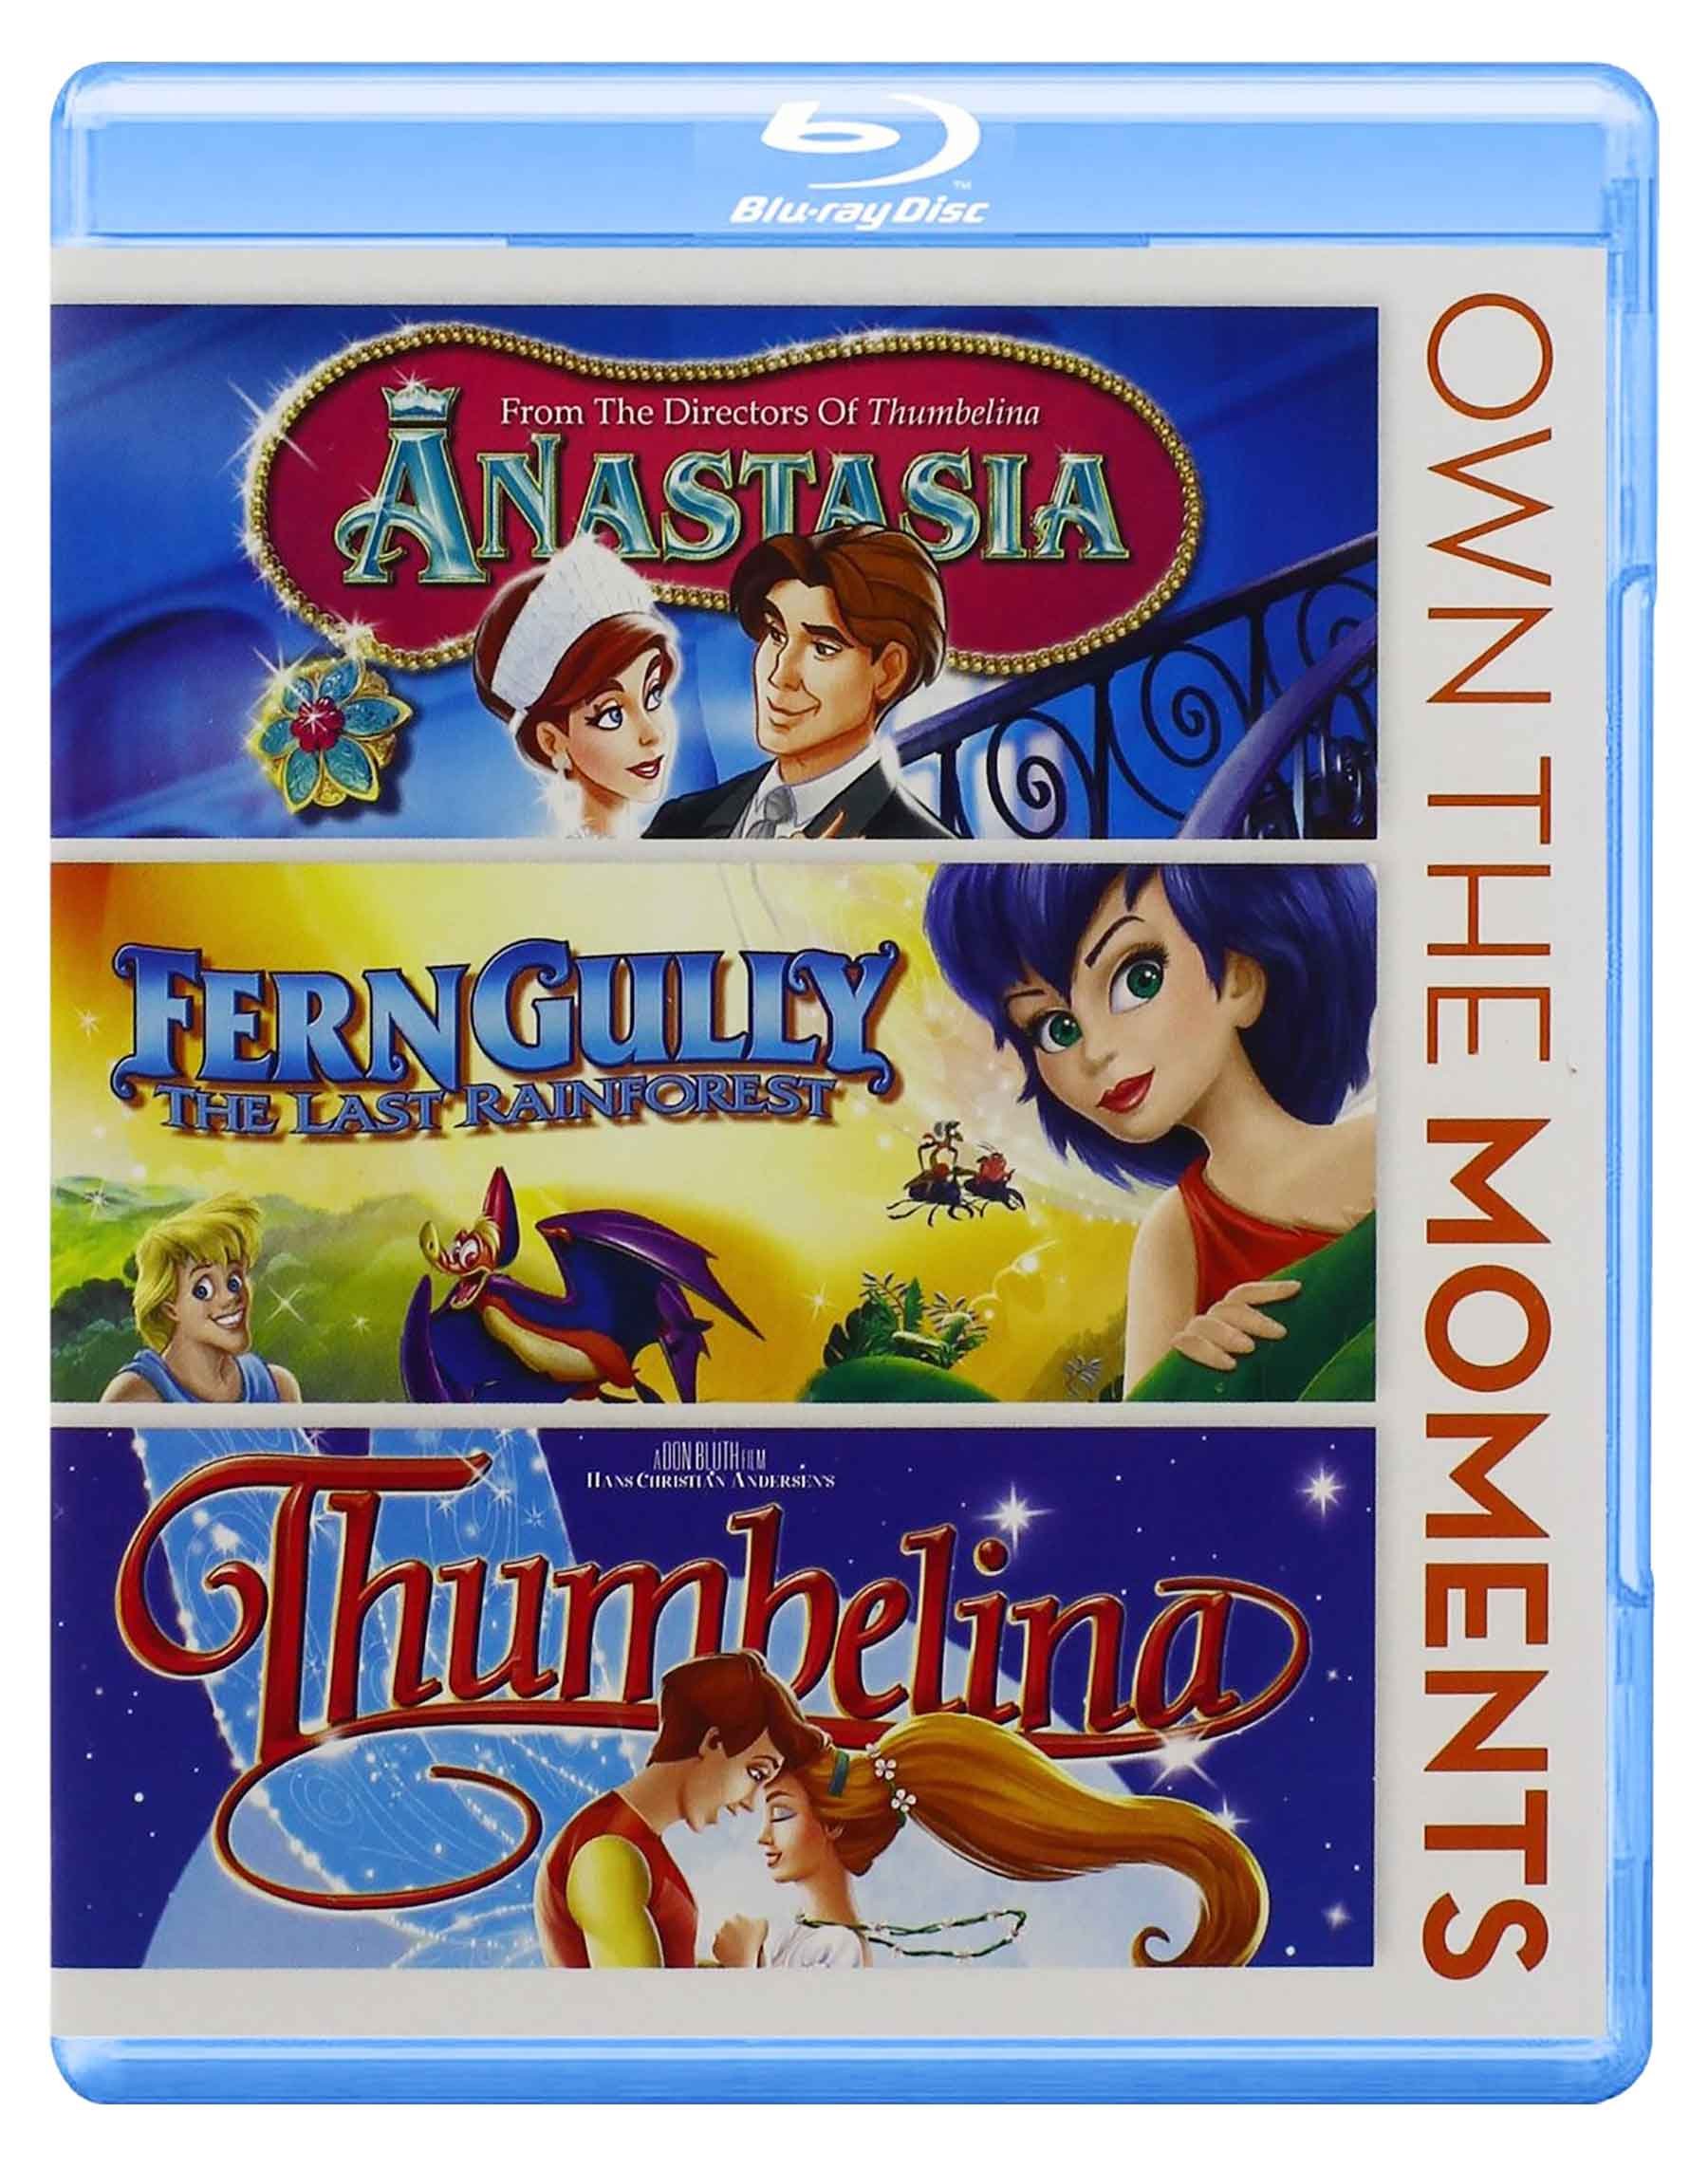 own-the-moments-3-movies-collection-anastasia-ferngully-the-last-rainforest-thumbelina-3-disc-box-set